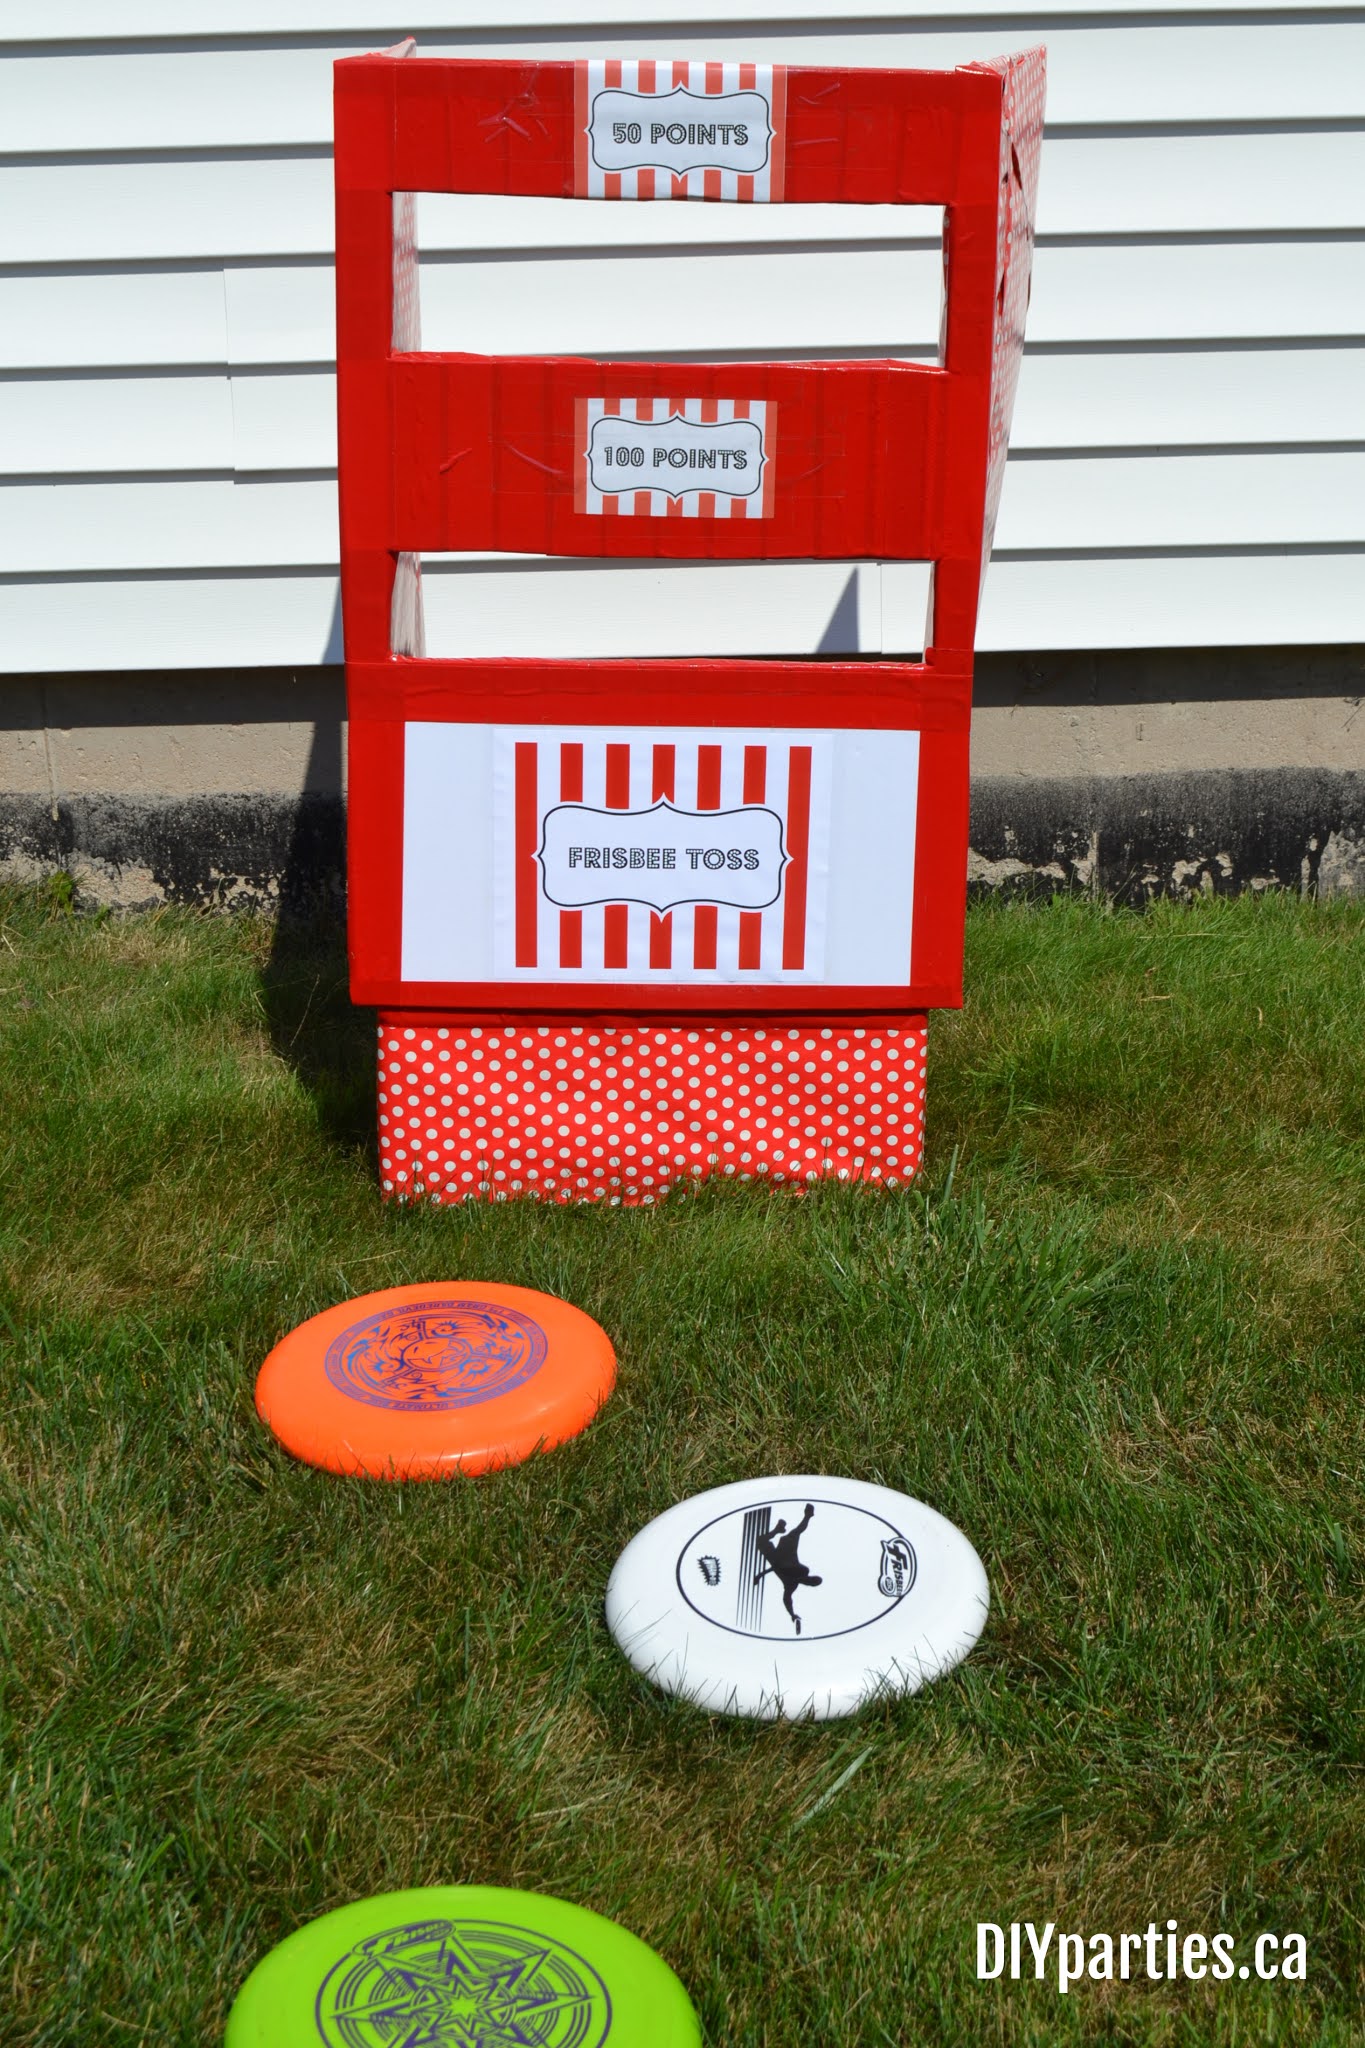 DIY Parties: Carnival Party Games and Activities